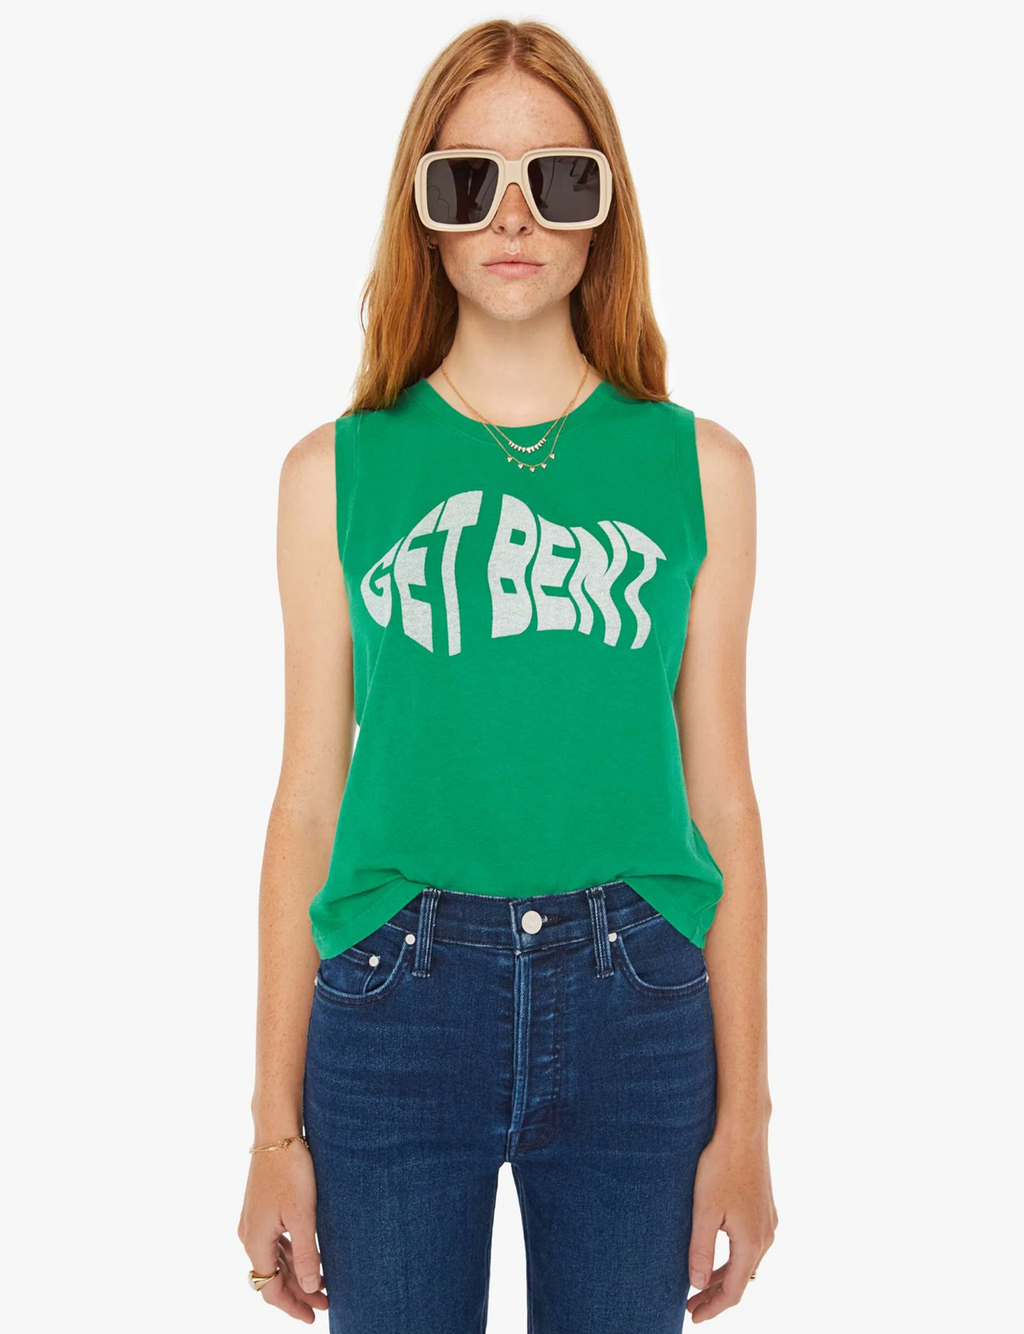 The Strong And Silent Type "Get Bent" Tank, Green